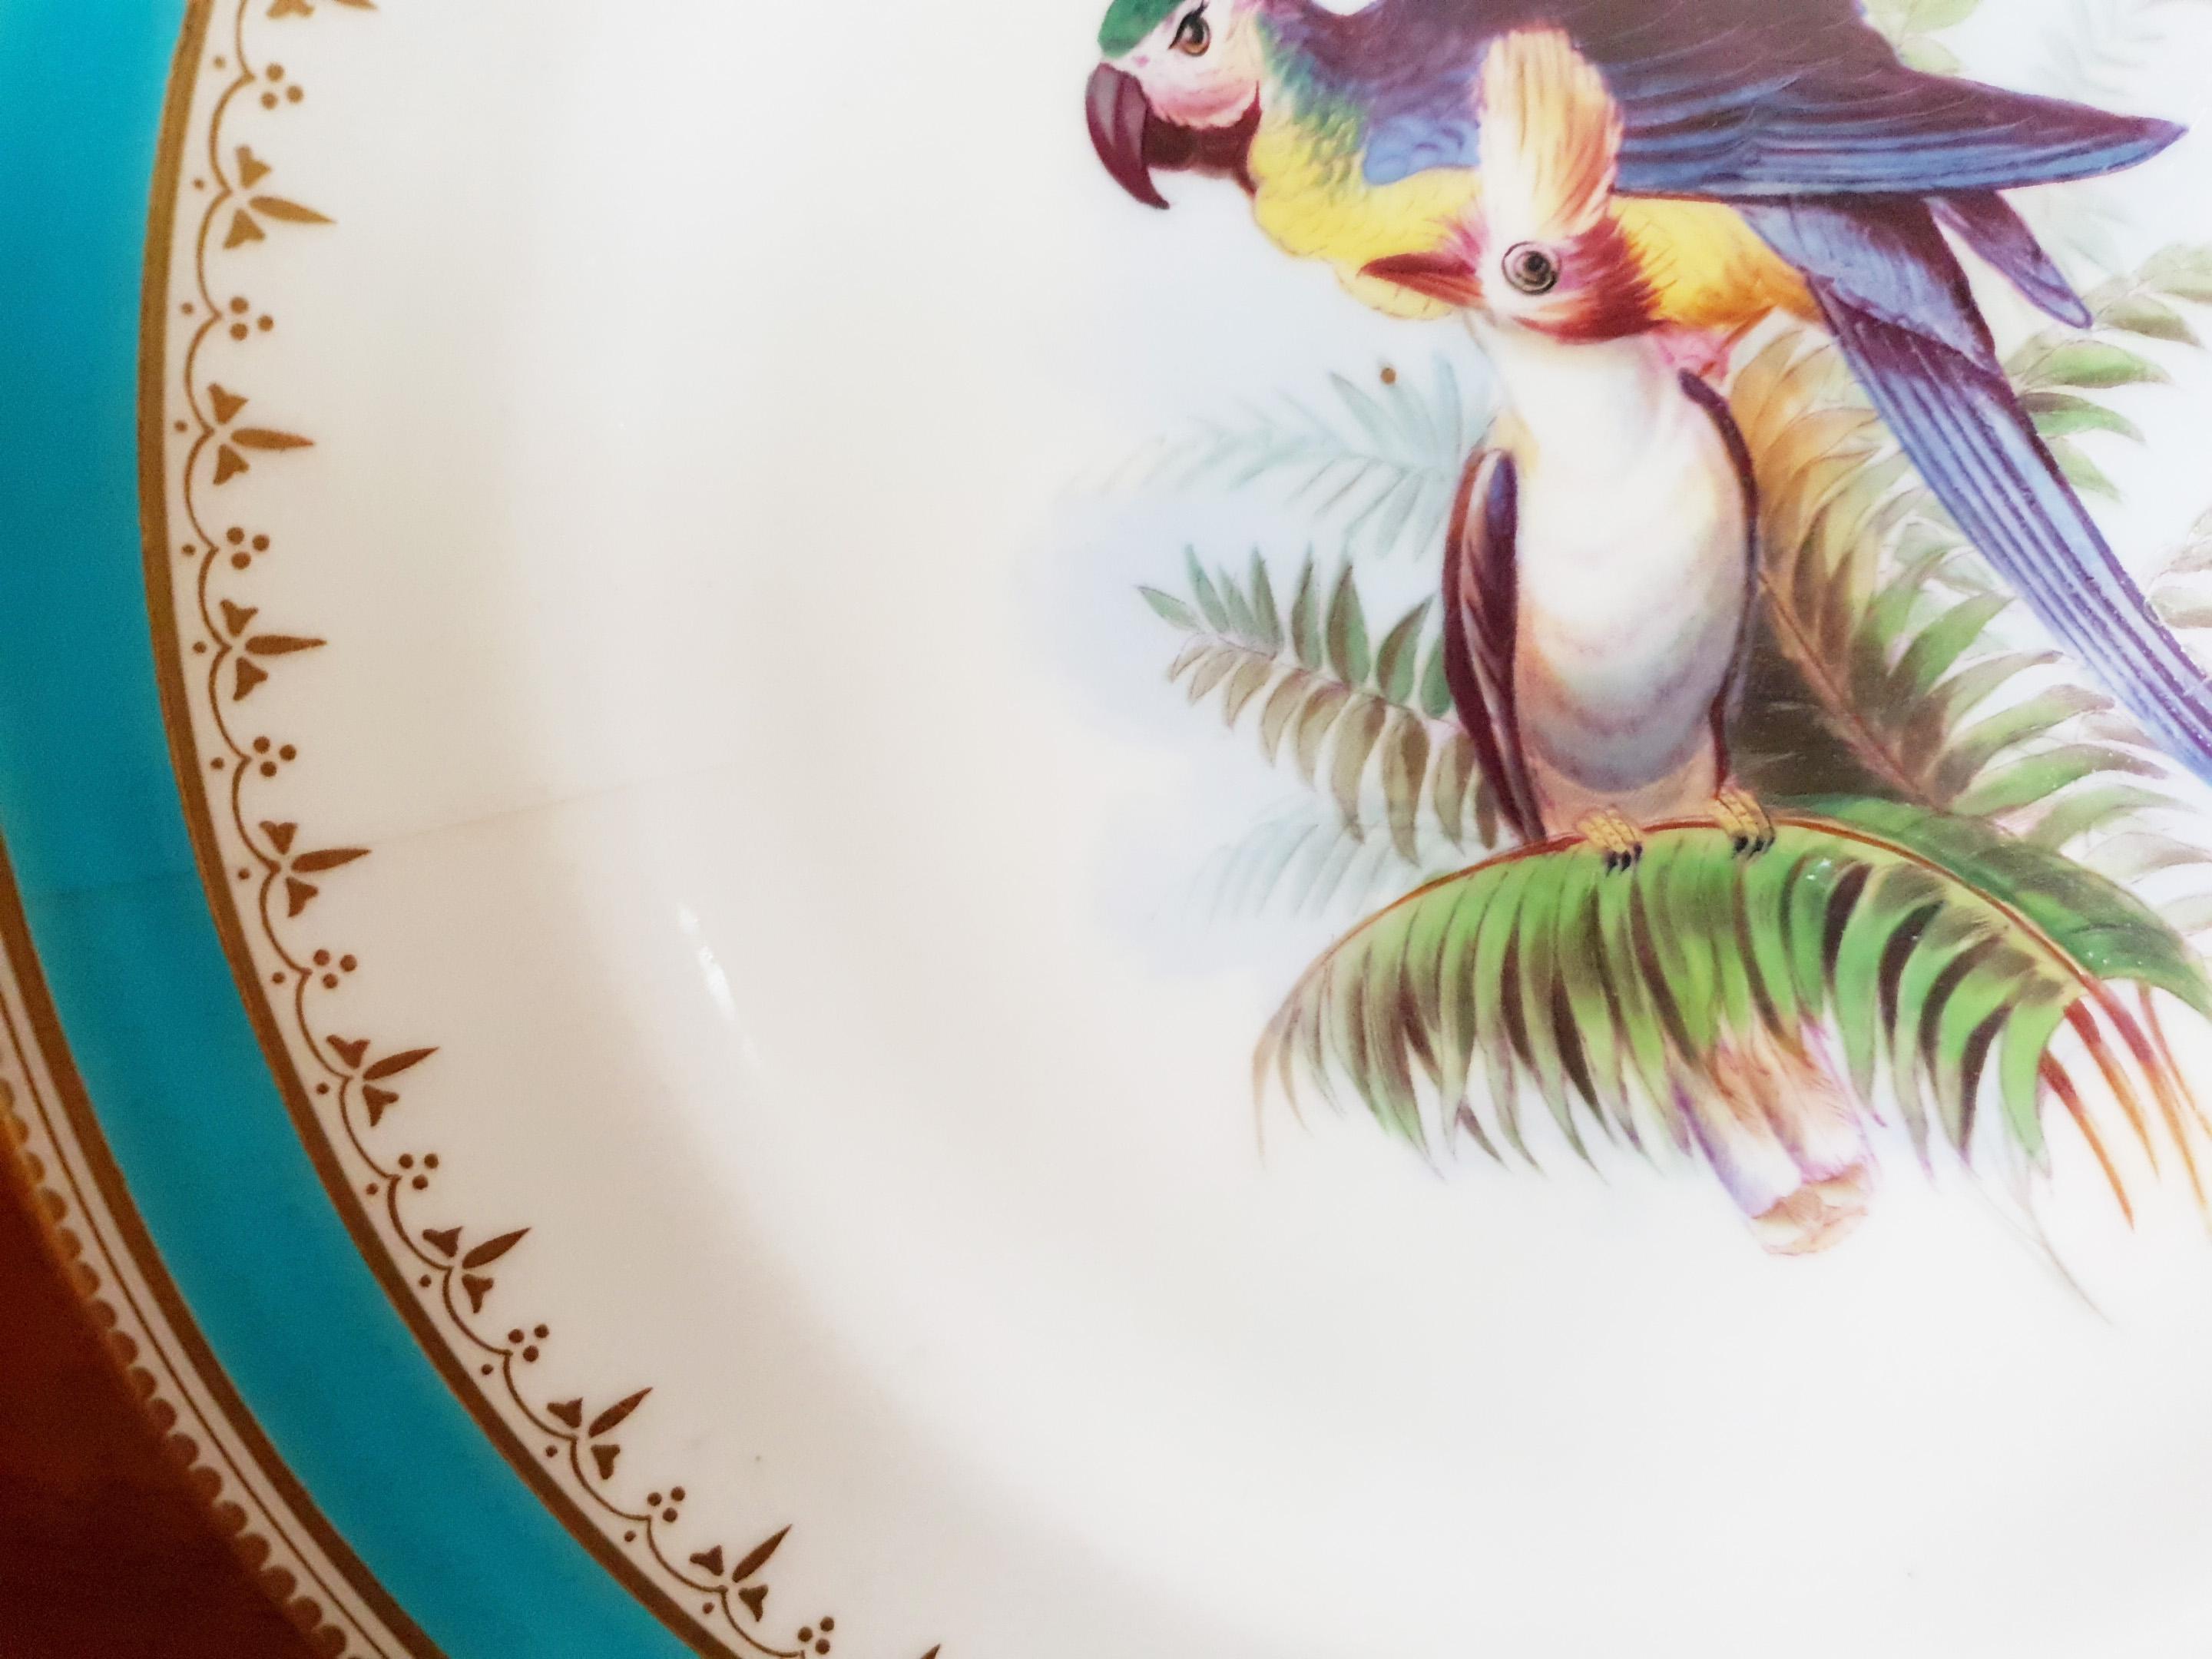 Minton Hand Painted Dinner Plates with Humming Birds and Parrots For Sale 8